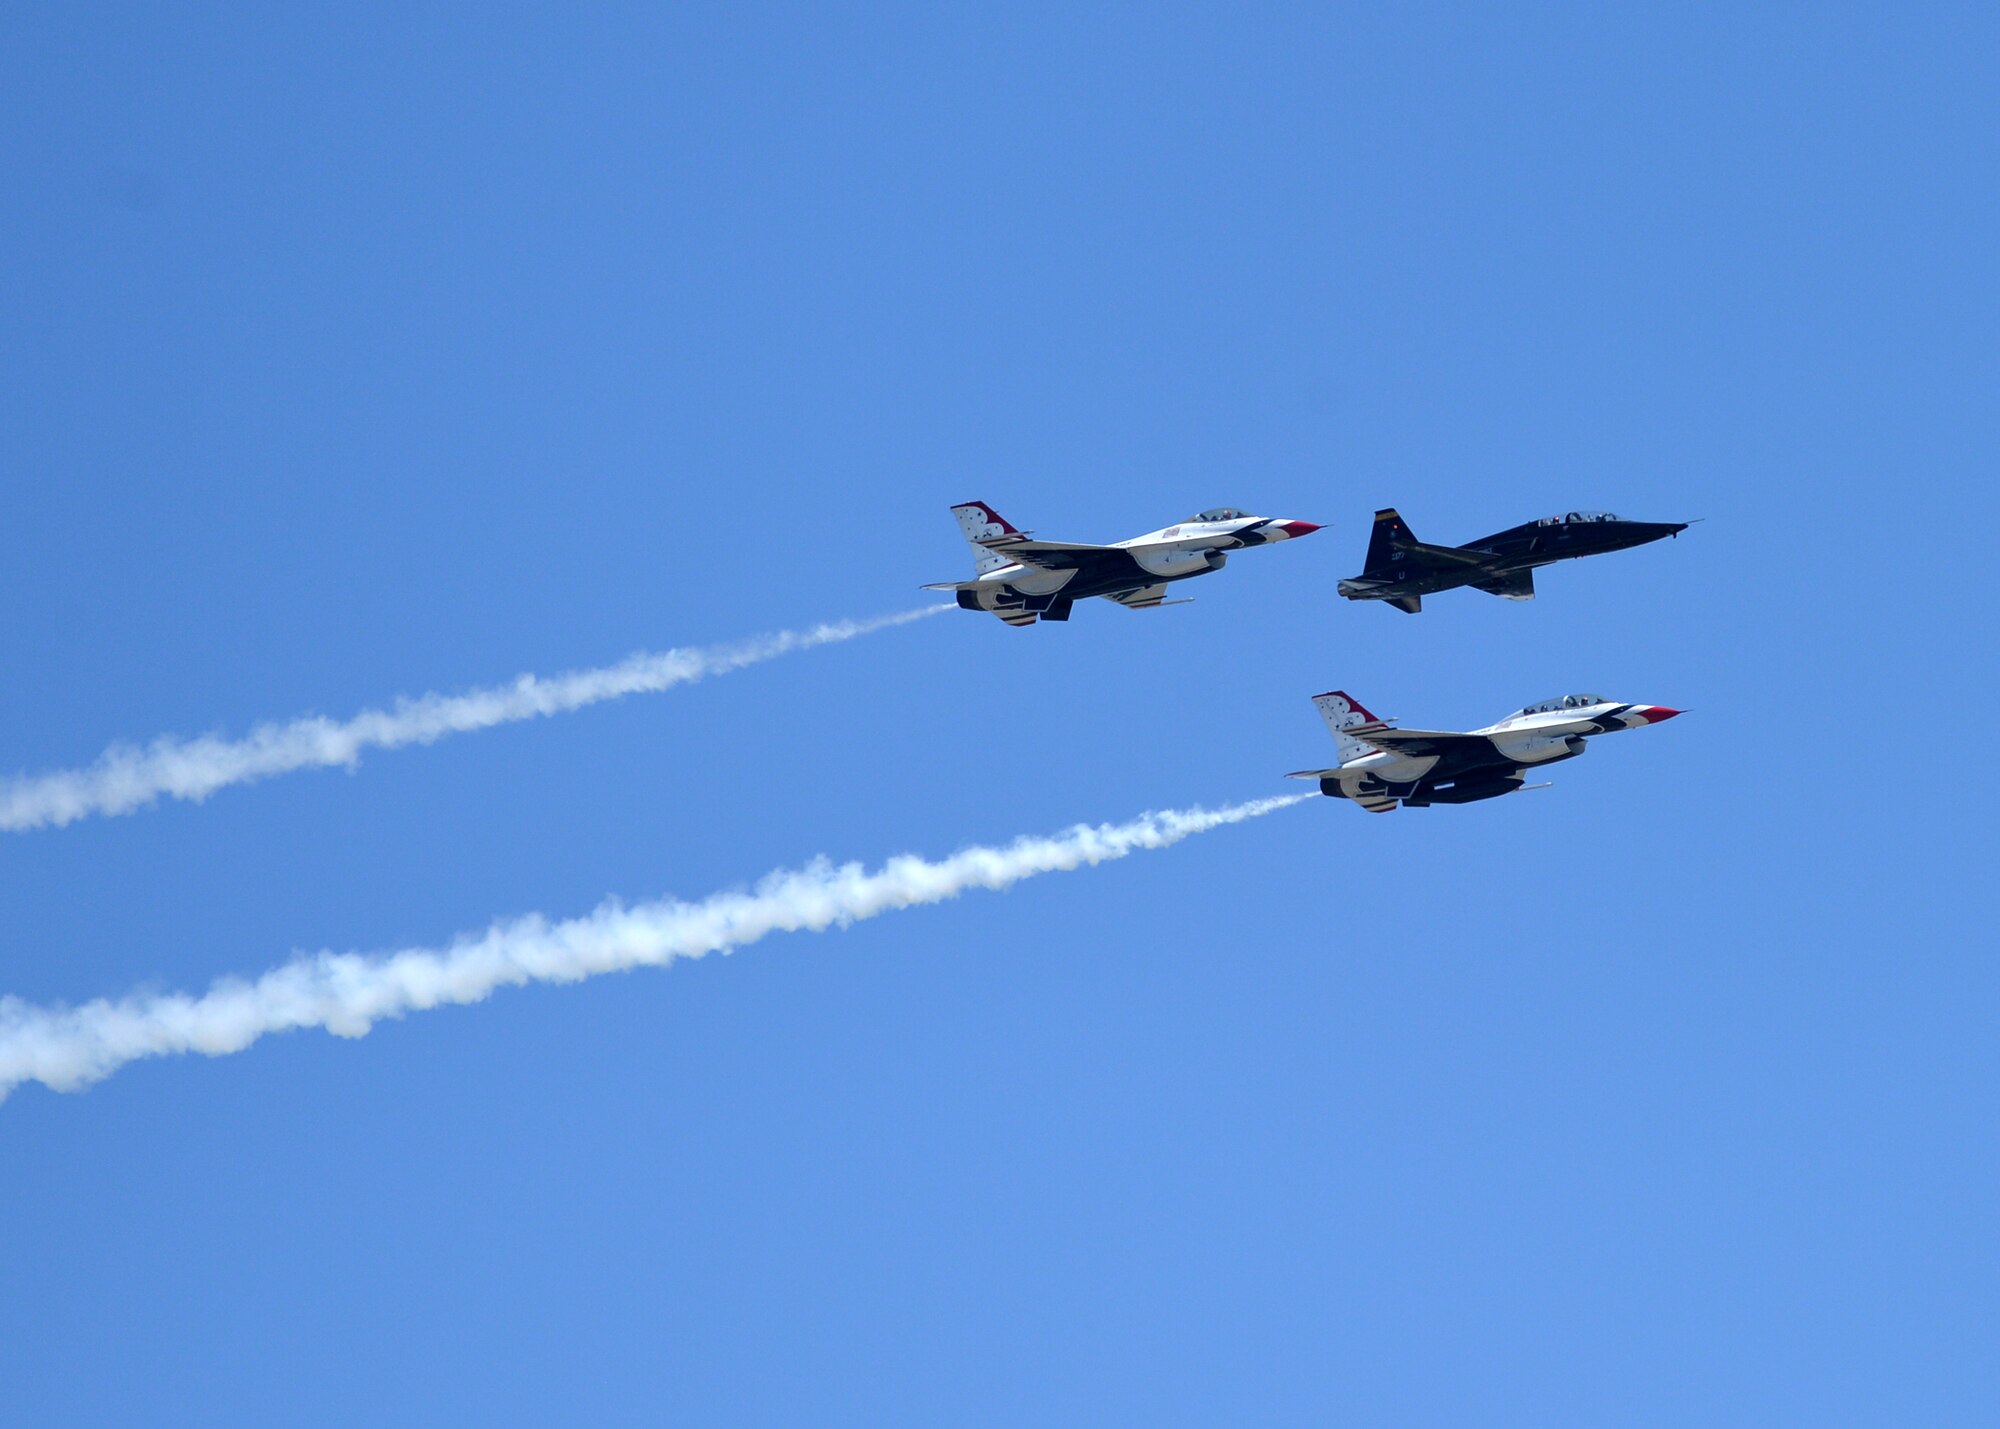 Retired U.S. Air Force Lt. Col. Dale Cooke, former 1982 Thunderbirds slot pilot and Lt. Col. Richard McCurdy, 2nd Fighter Training Squadron commander (middle position), are accompanied by U.S. Air Force Air Demonstration Squadron Thunderbirds Maj. Nick Krajicek, slot pilot (left), and Lt. Col. Kevin Walsh, operations officer (bottom right), during a low pass over the flight line at Tyndall Air Force Base, Fla., April 21, 2017. Cooke flew aircraft #177 (Slot Machine) in the early 1980s and the name Slot Machine was carried over to the current F-16 Falcon that holds the slot position in the Thunderbirds formation. (U.S. Air Force photo by Tech. Sgt. Javier Cruz/ Released)